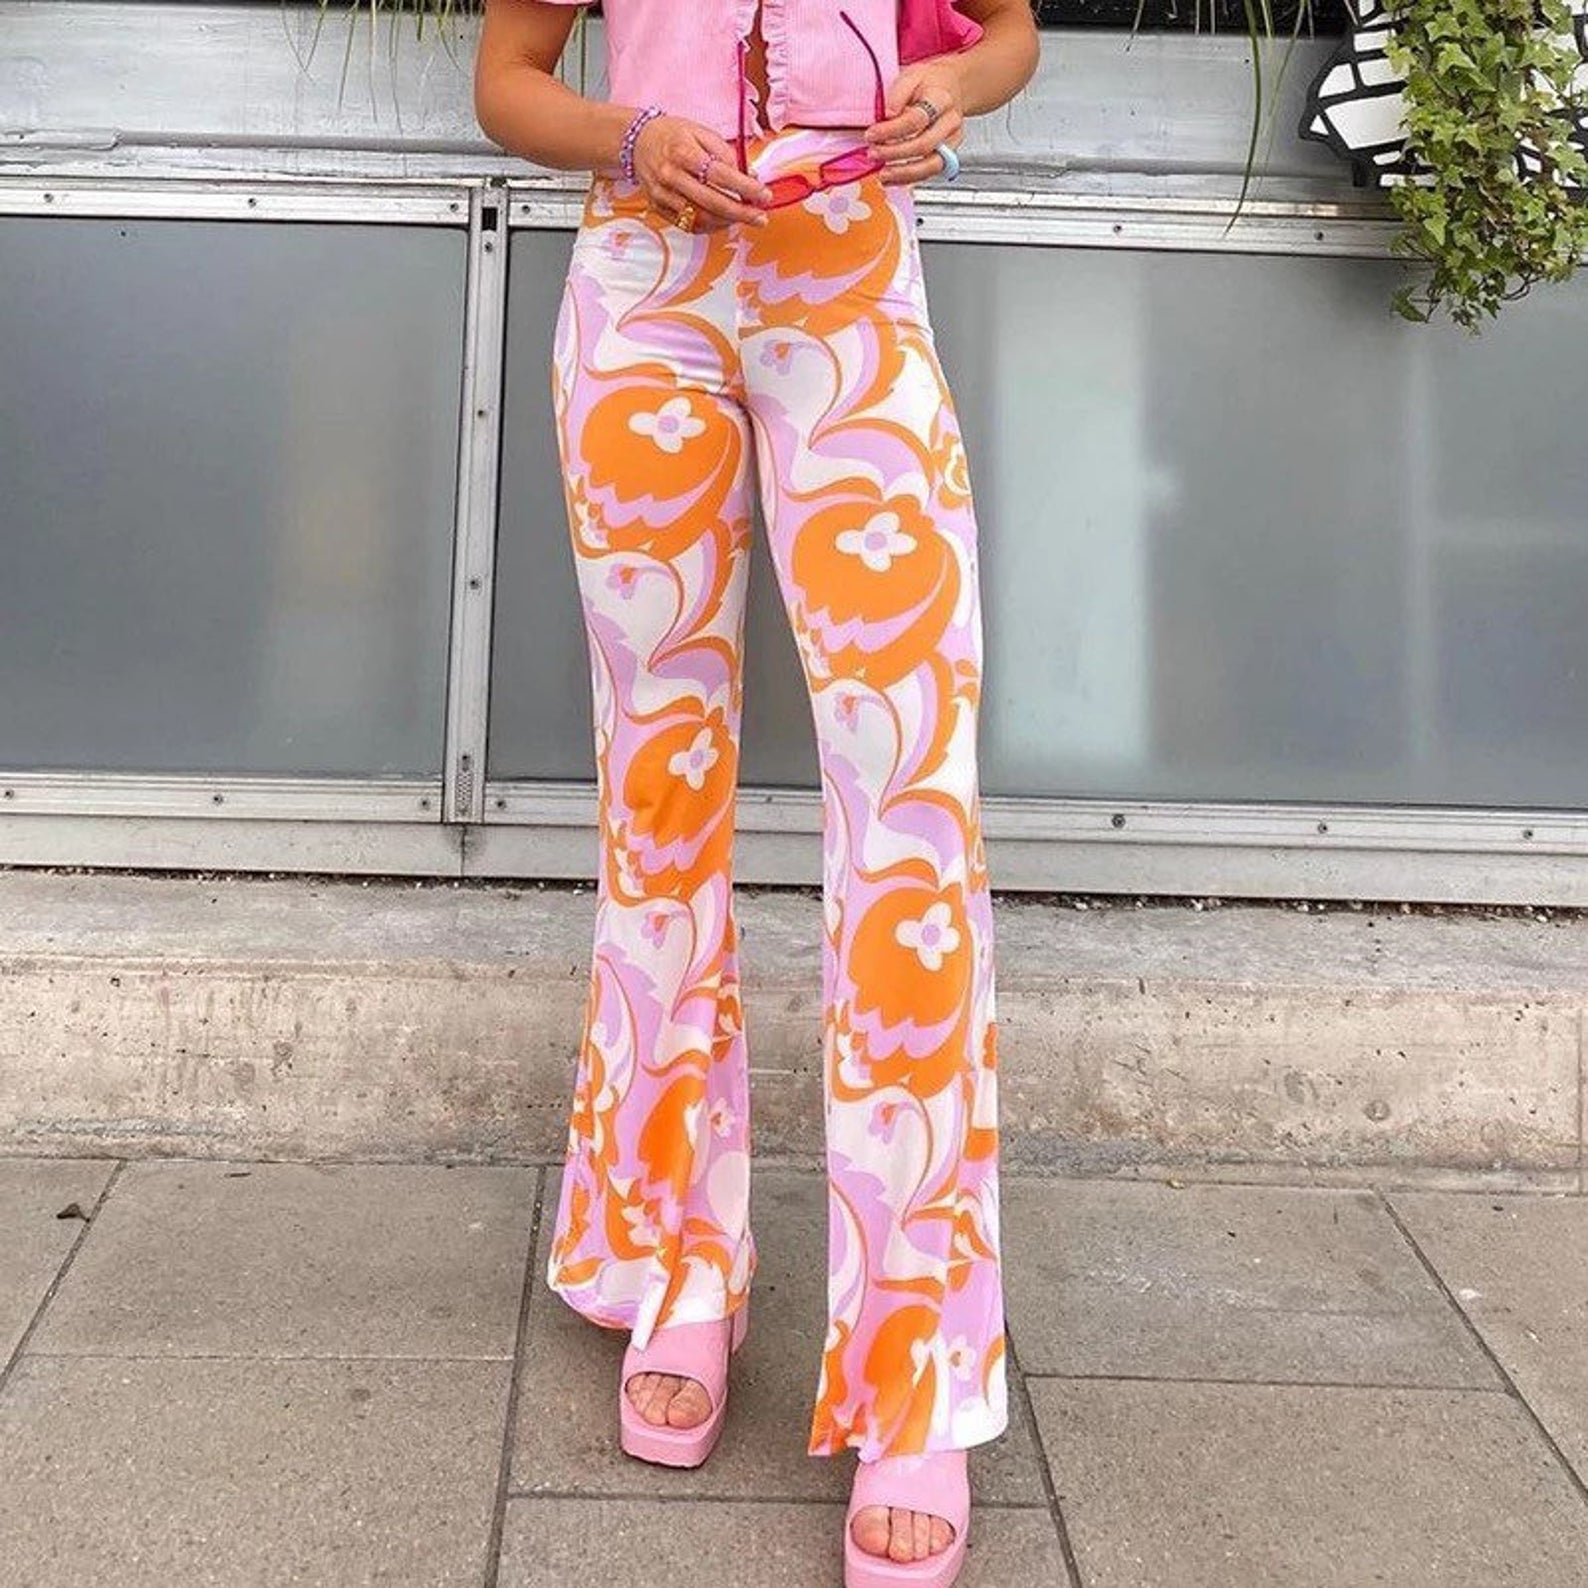 Retro Floral Flare Pants  Alicia Keys's Flared Floral Golfing